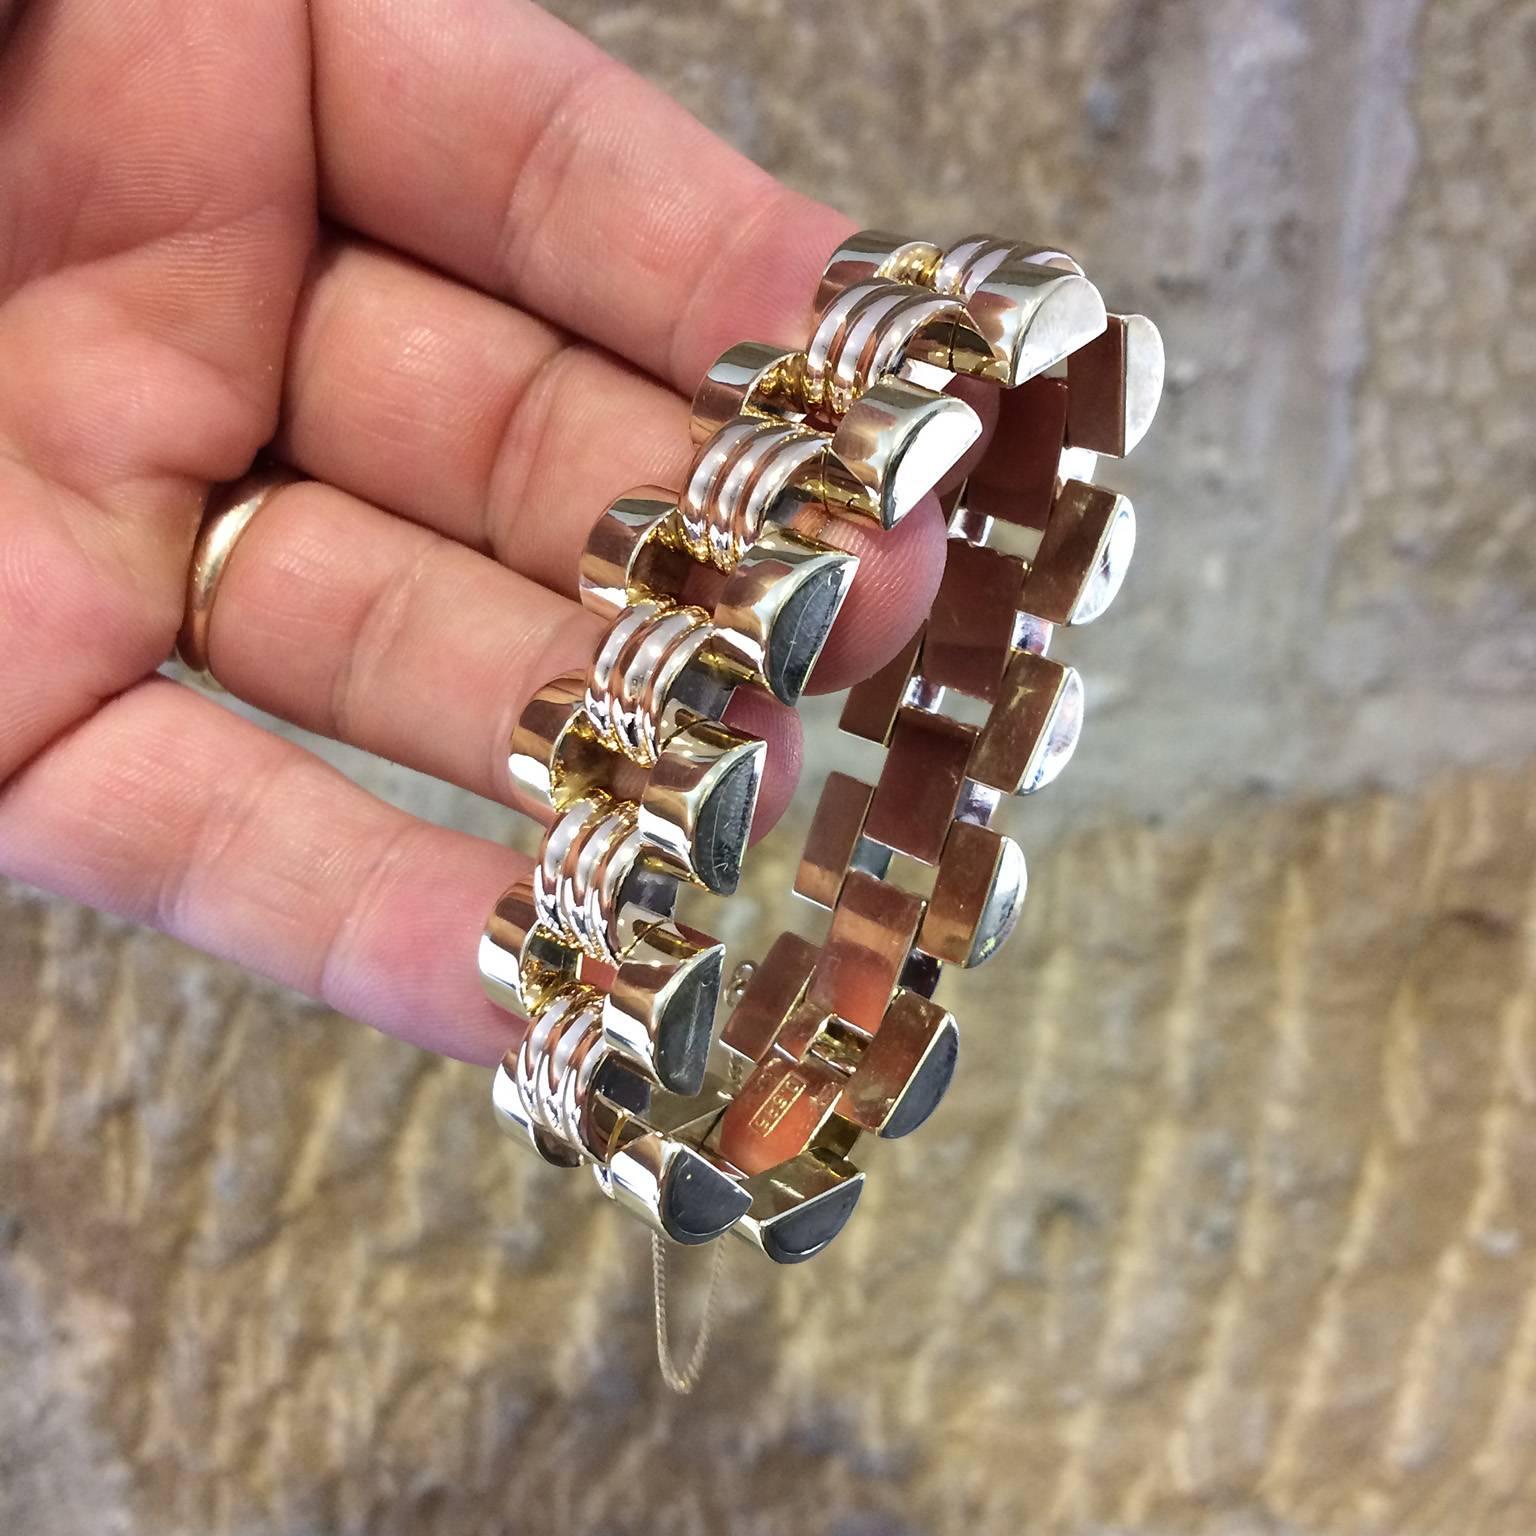 A fine, stylish and impressive vintage gold bracelet. Featuring semi-circular links arranged in a brick pattern. The outer links are high polished yellow, the centre links in rose with three ridges. Two spare links can be refitted to lengthen the